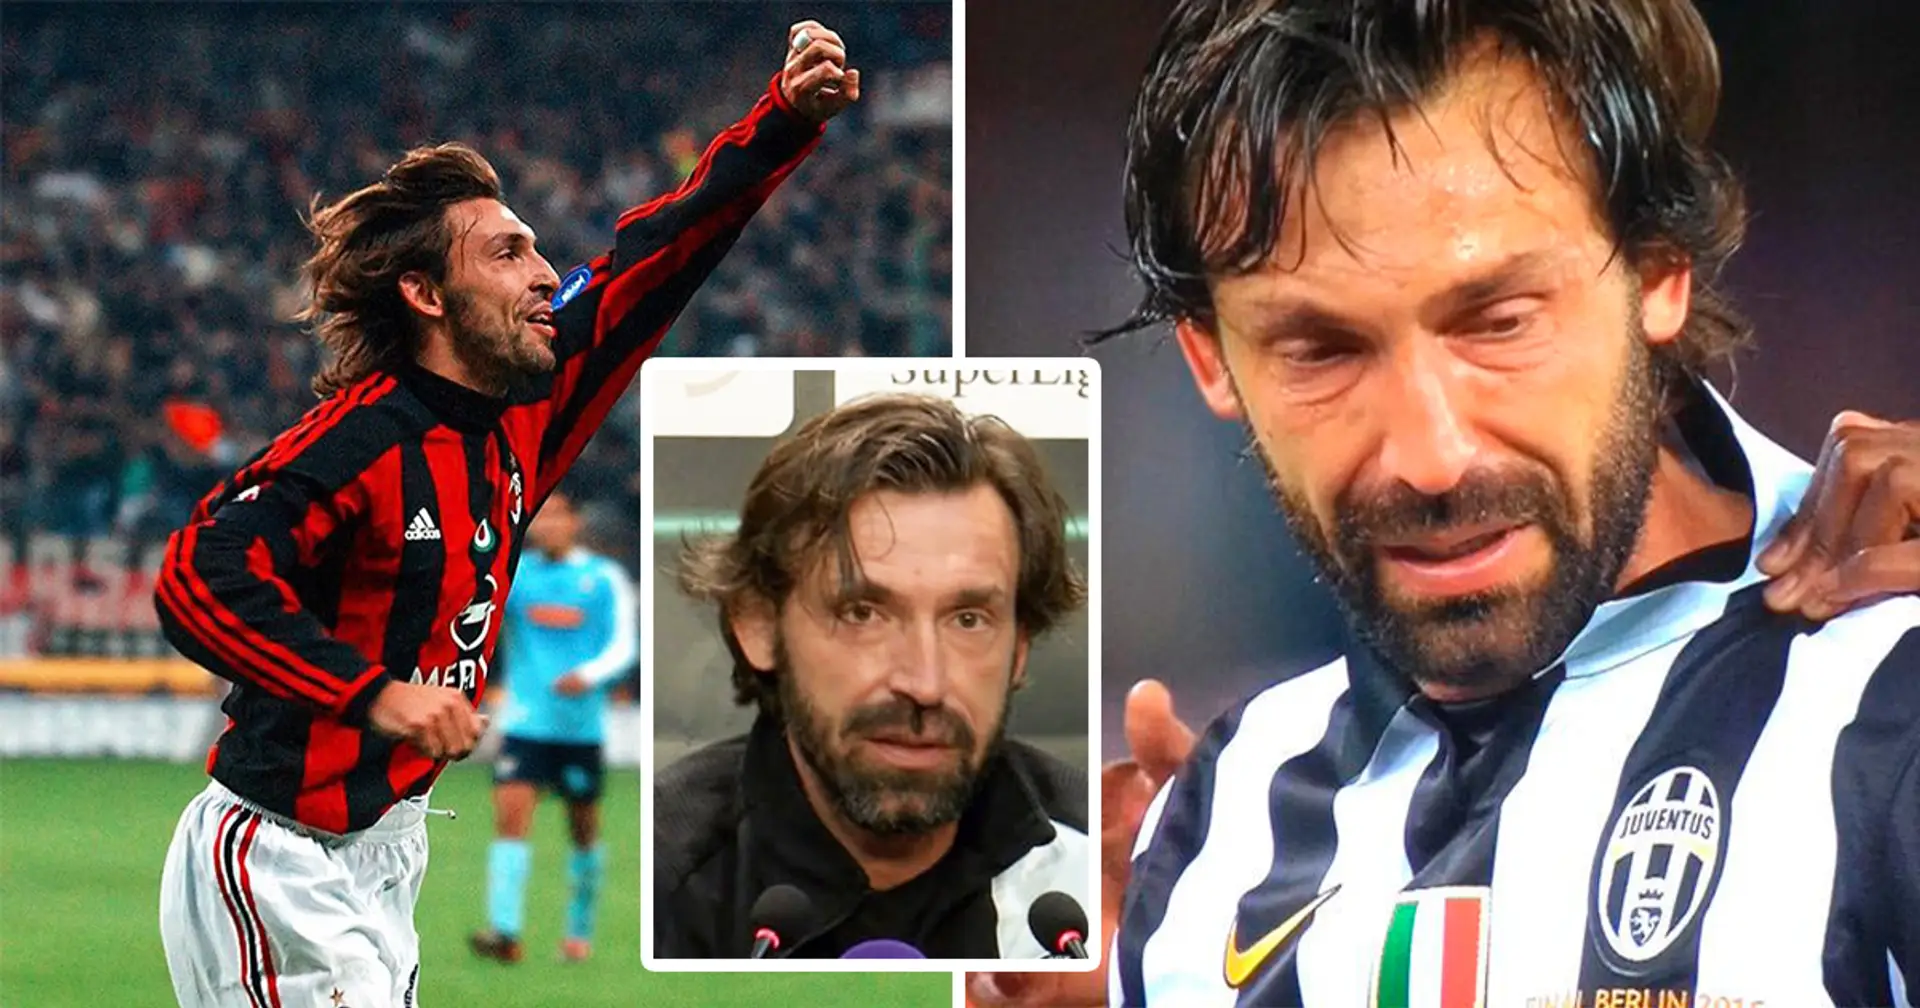 'I would have stayed at Milan all my life': Andrea Pirlo says he's not a traitor